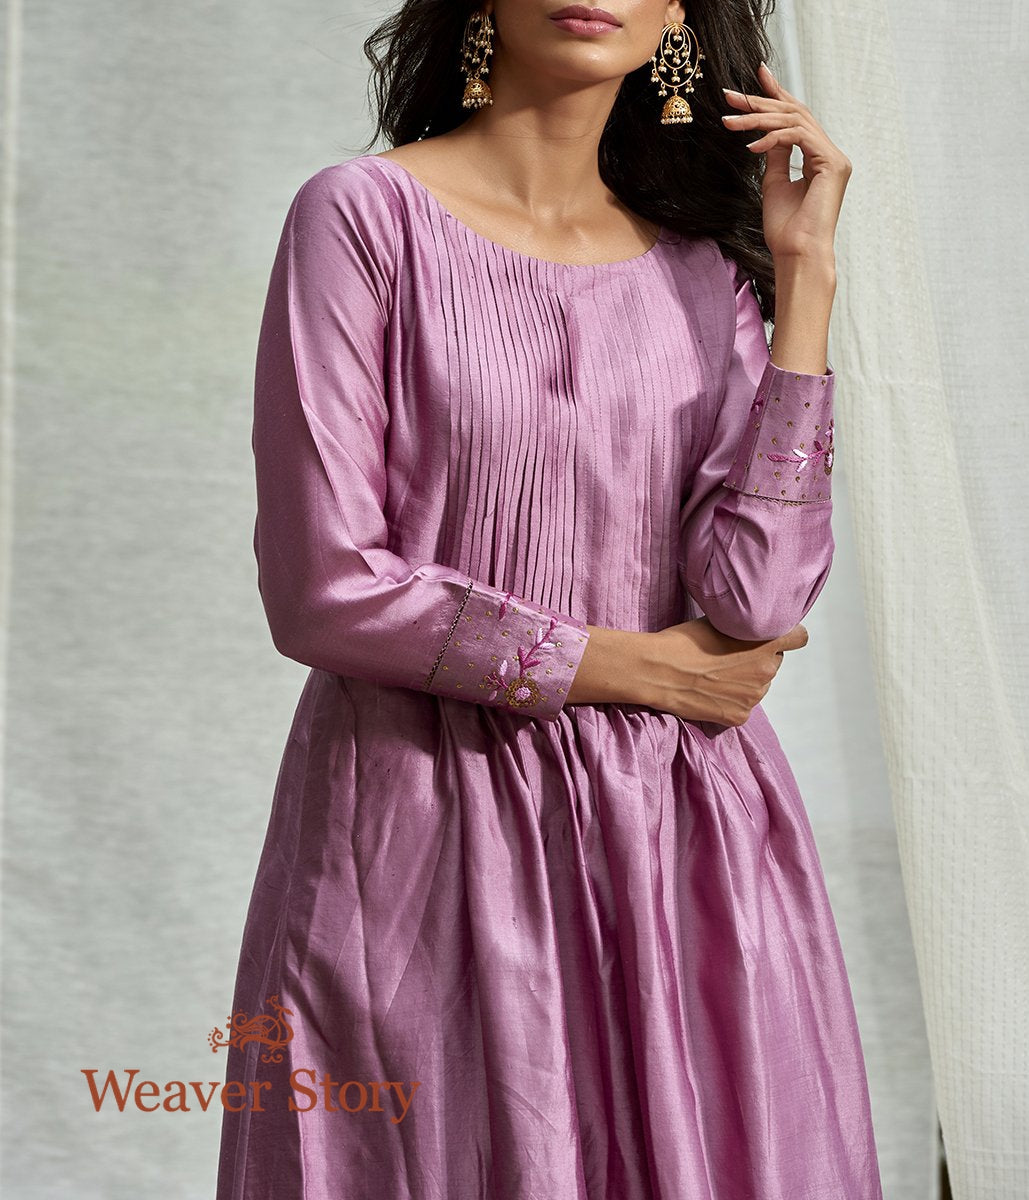 Handwoven_Purple_Front_Pintex_Tunic_with_Embroidered_Cuffs_with_Purple_Striped_Pants_WeaverStory_02